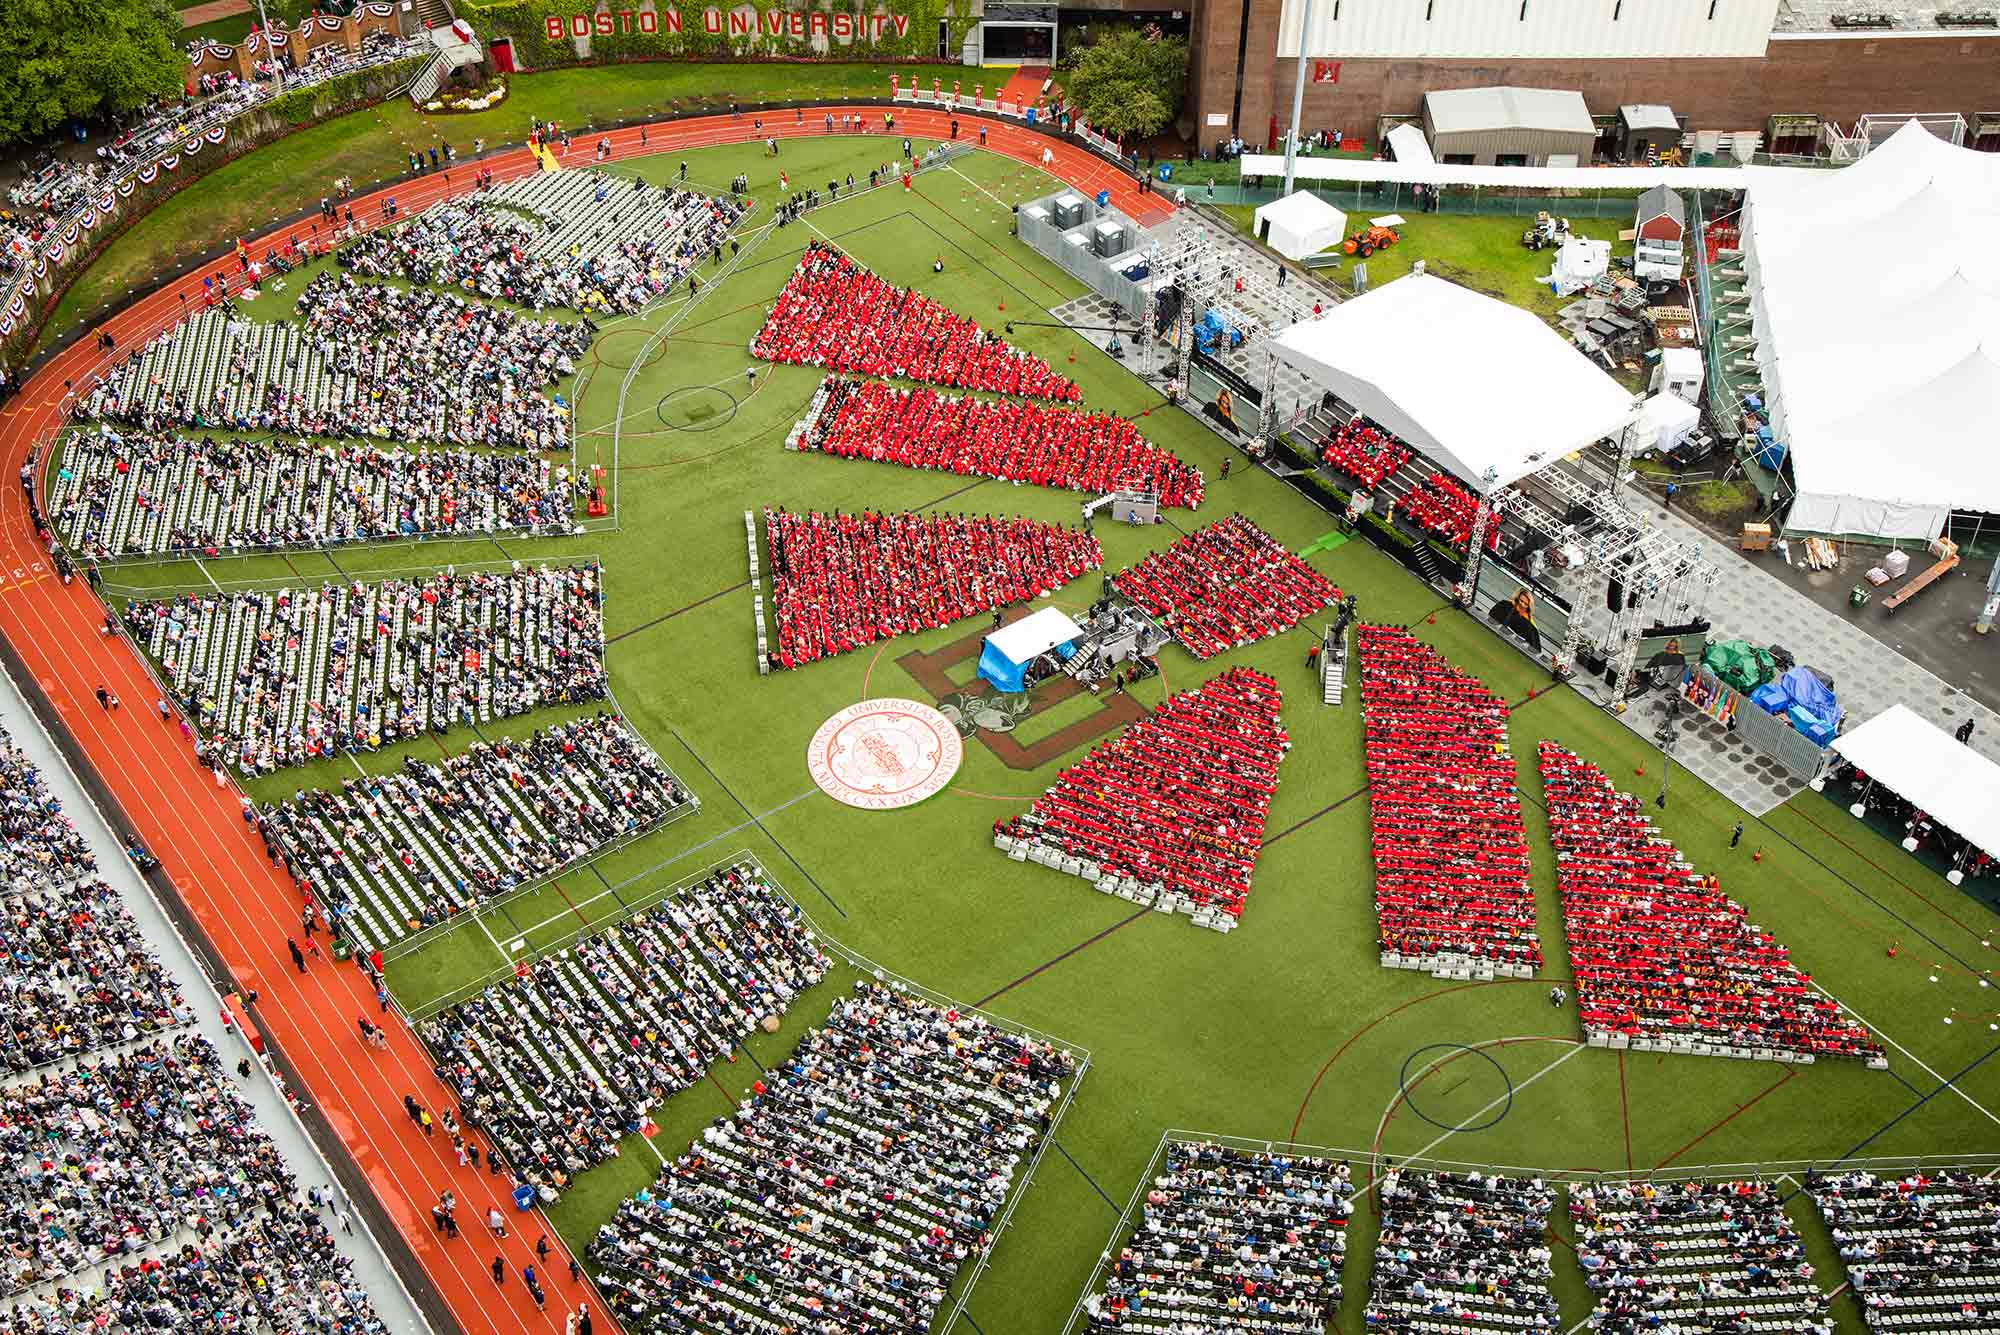 Aerial view of the 2019 Boston University Commencement on Nickerson Field on May 19, 2019.